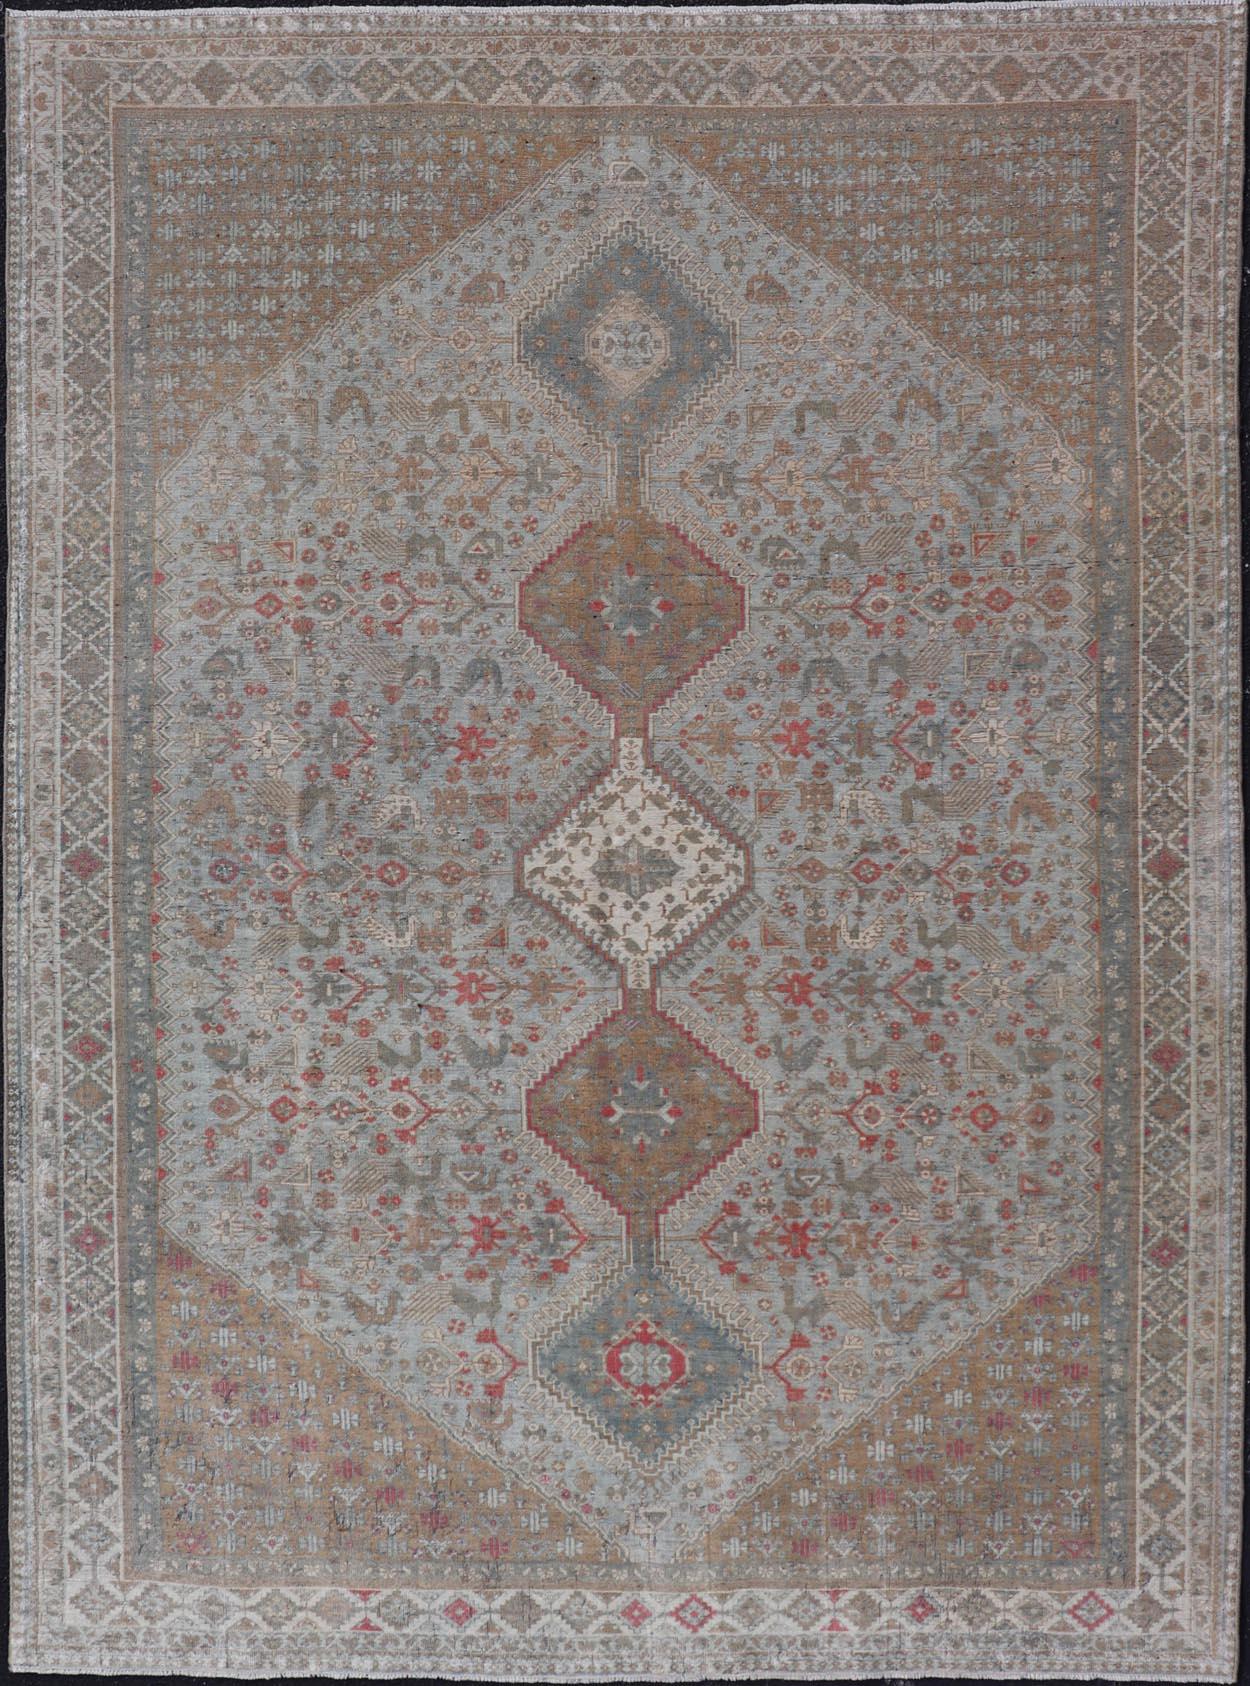  Antique Persian Qashgai Tribal Rug with stacked  diamond medallions and tribal 